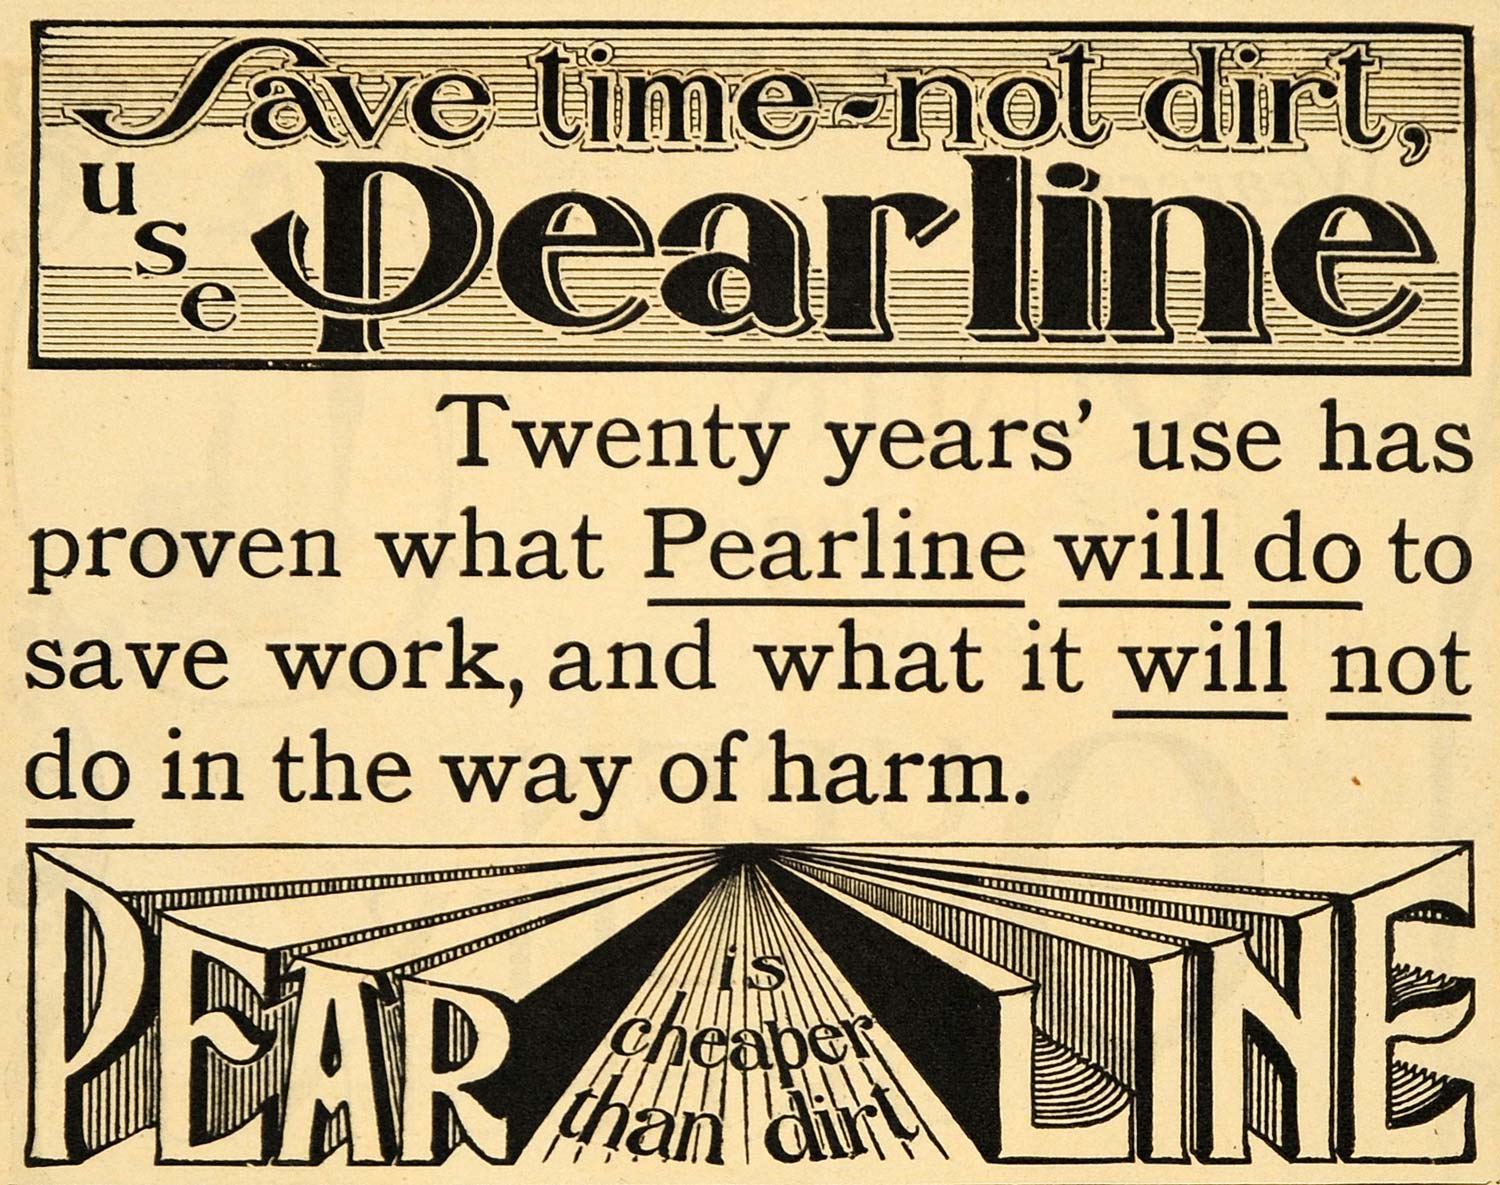 1899 Ad Pearline James Pyle Washing Compound Cleaner - ORIGINAL ADVERTISING MUN1